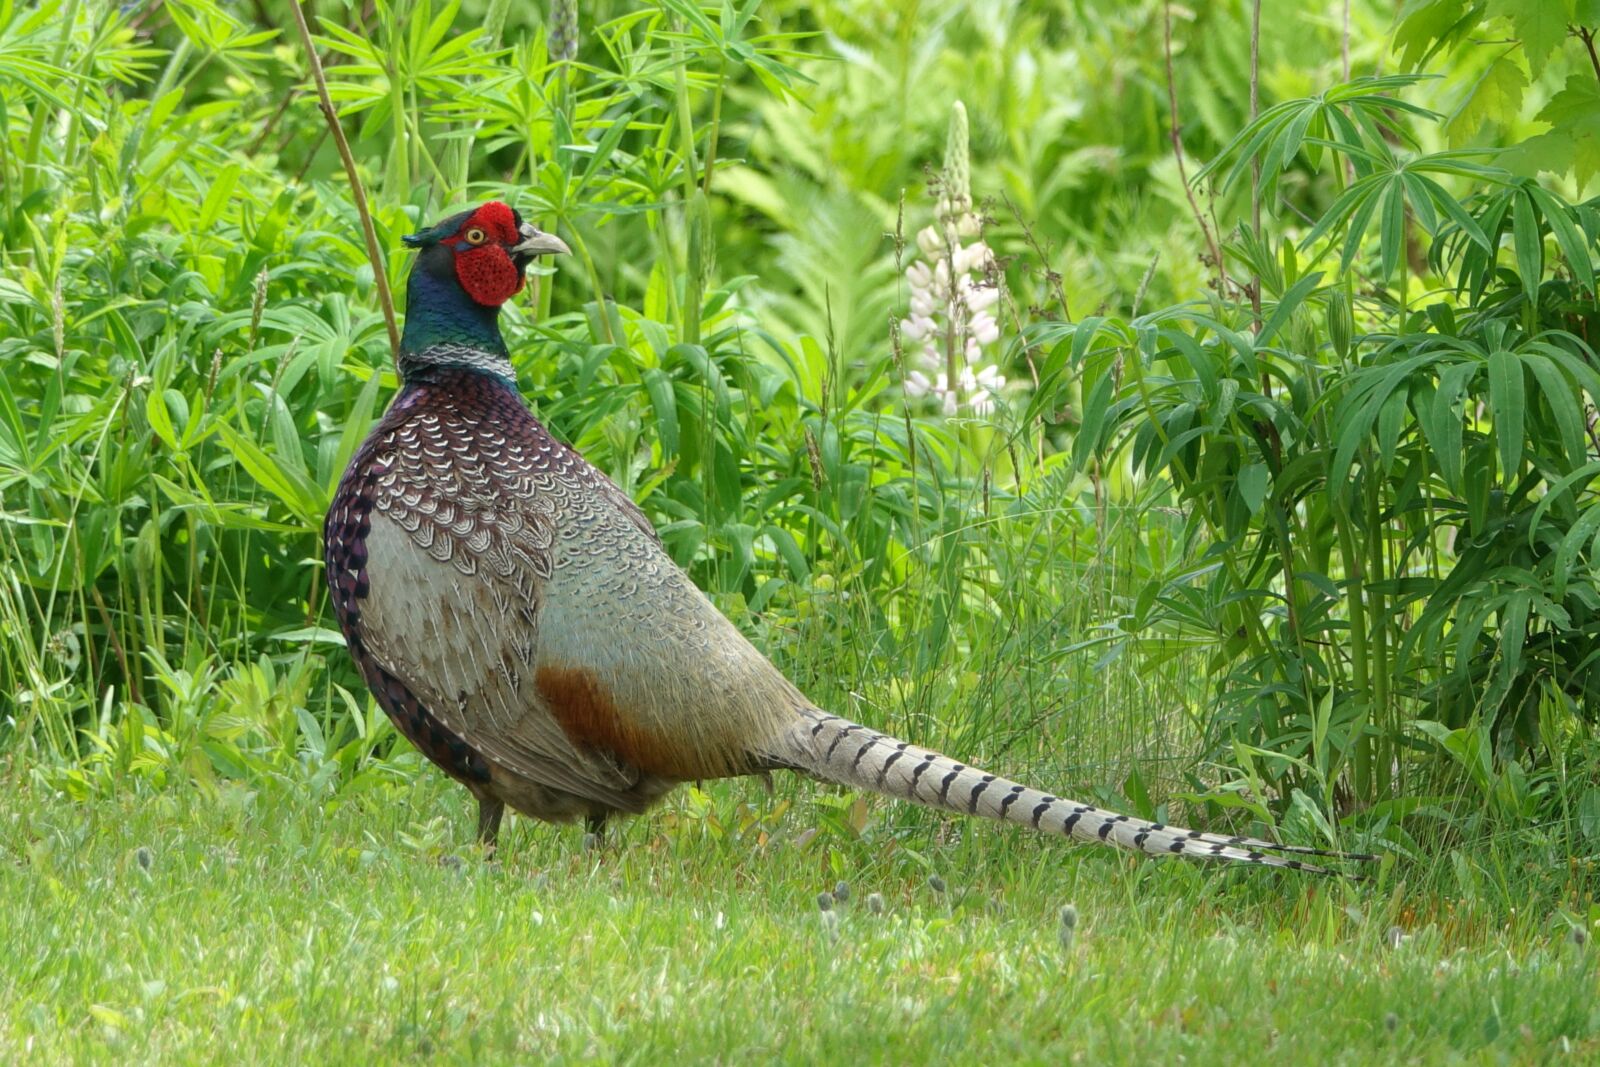 Sony Cyber-shot DSC-RX10 III sample photo. Ring necked pheasant, pheasant photography